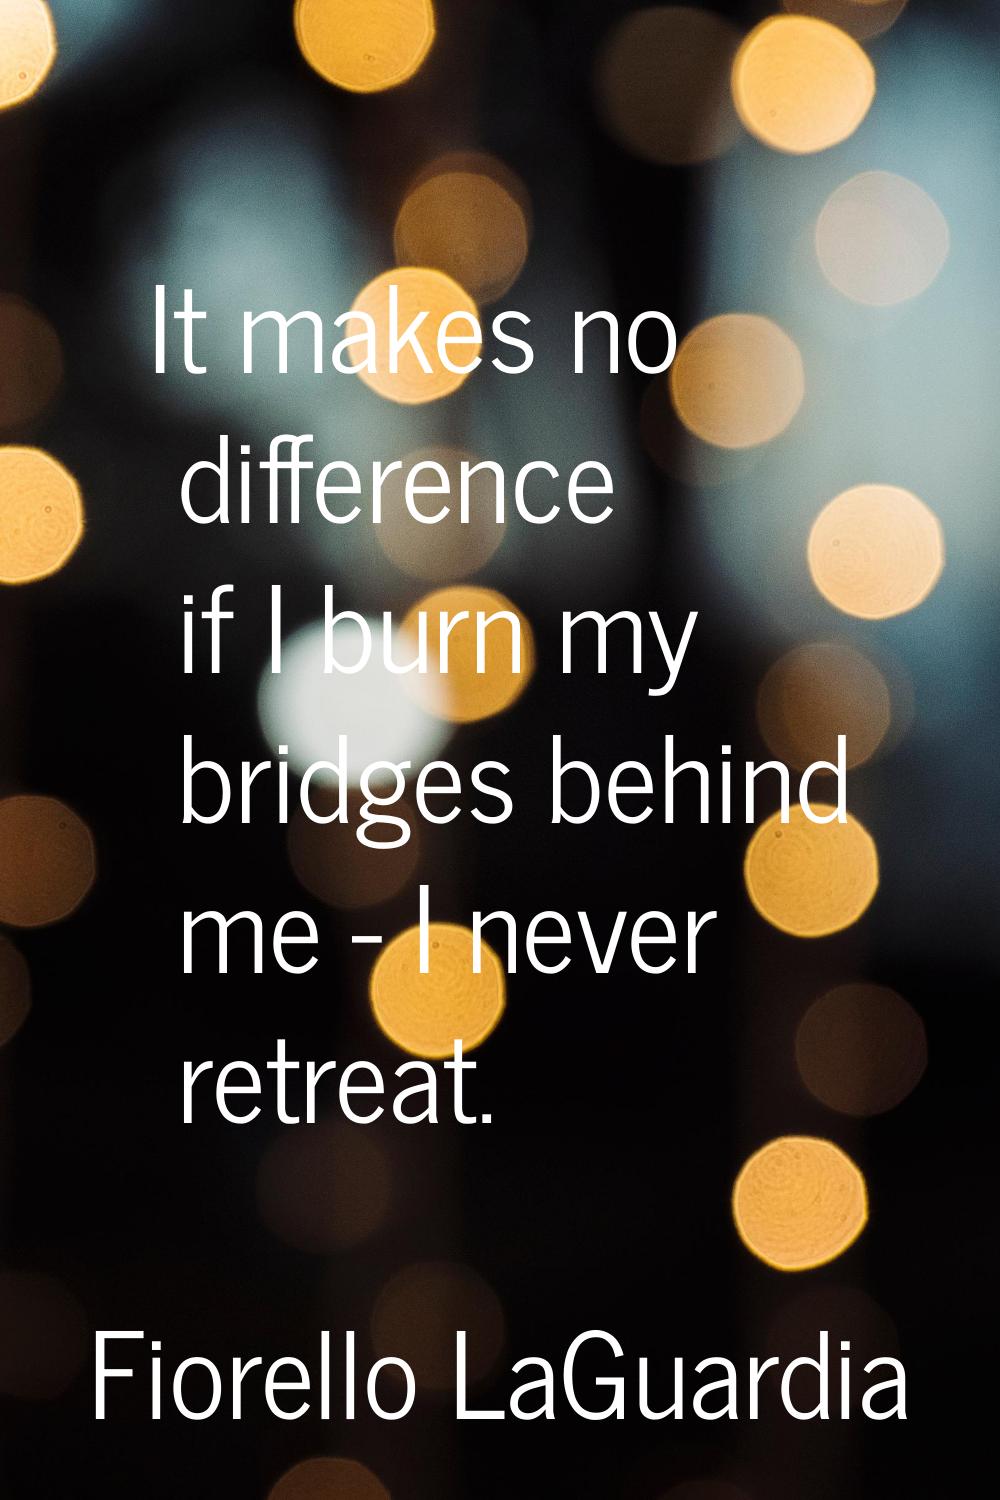 It makes no difference if I burn my bridges behind me - I never retreat.